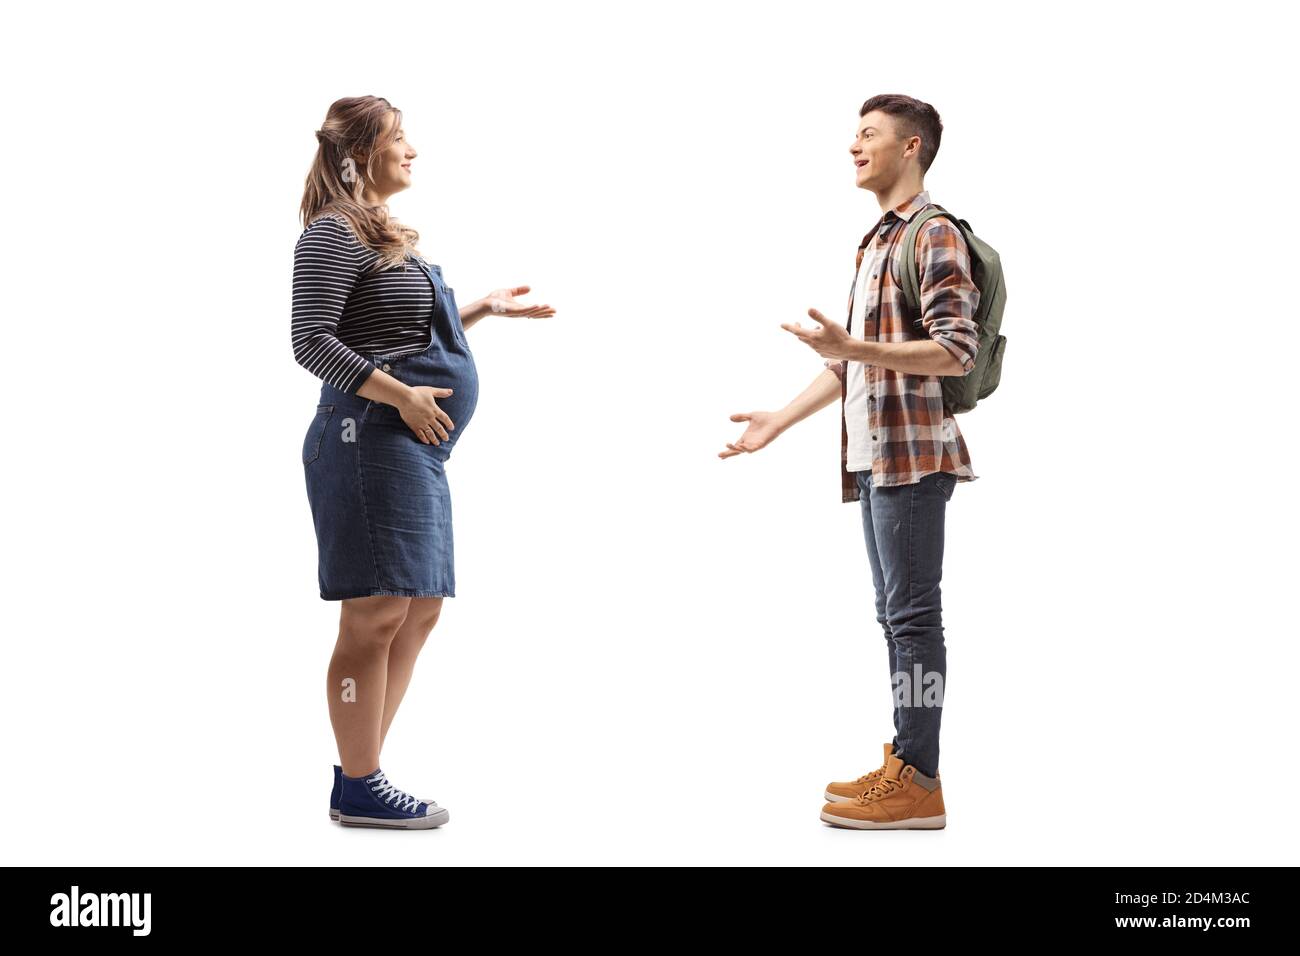 Full length profile shot of a pregnant woman talking to a male student with a backpack isolated on white background Stock Photo